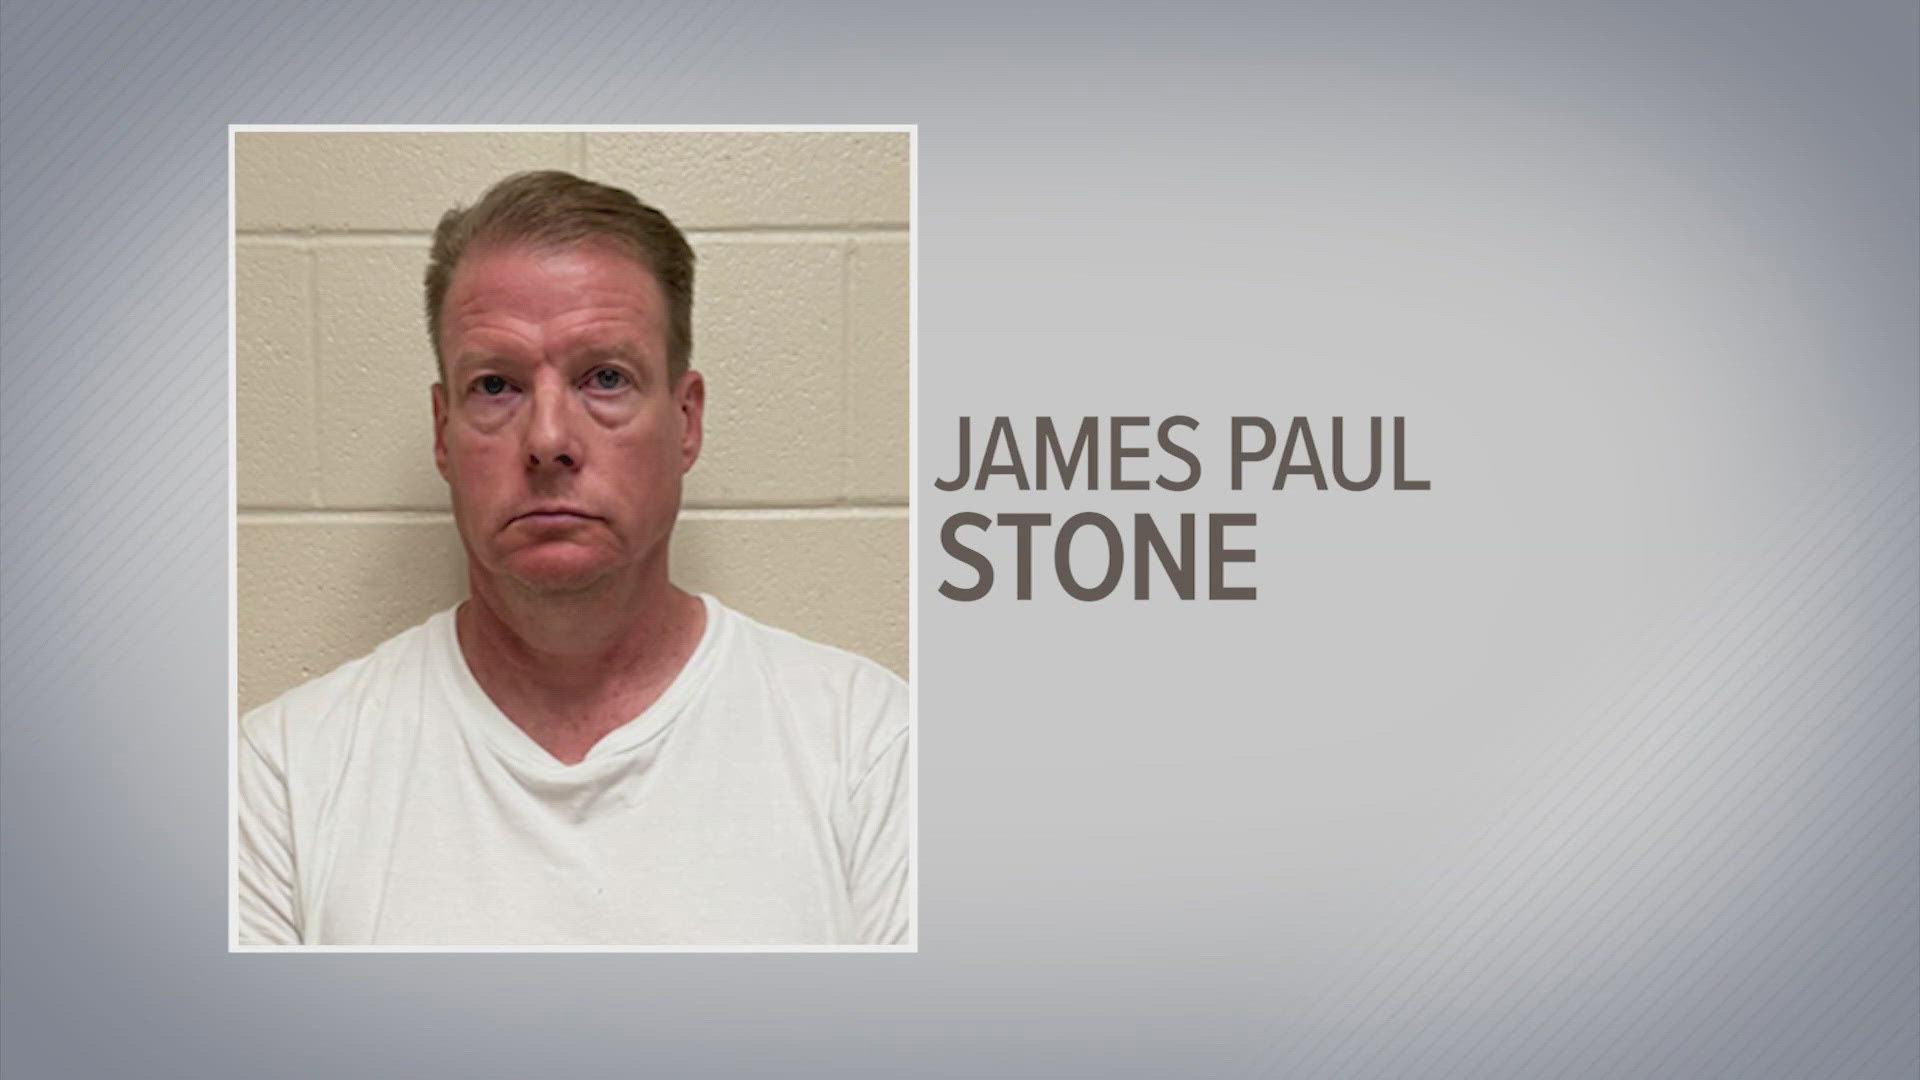 James Paul Stone was arrested and charged with 10 counts of possession of child pornography, authorities said.